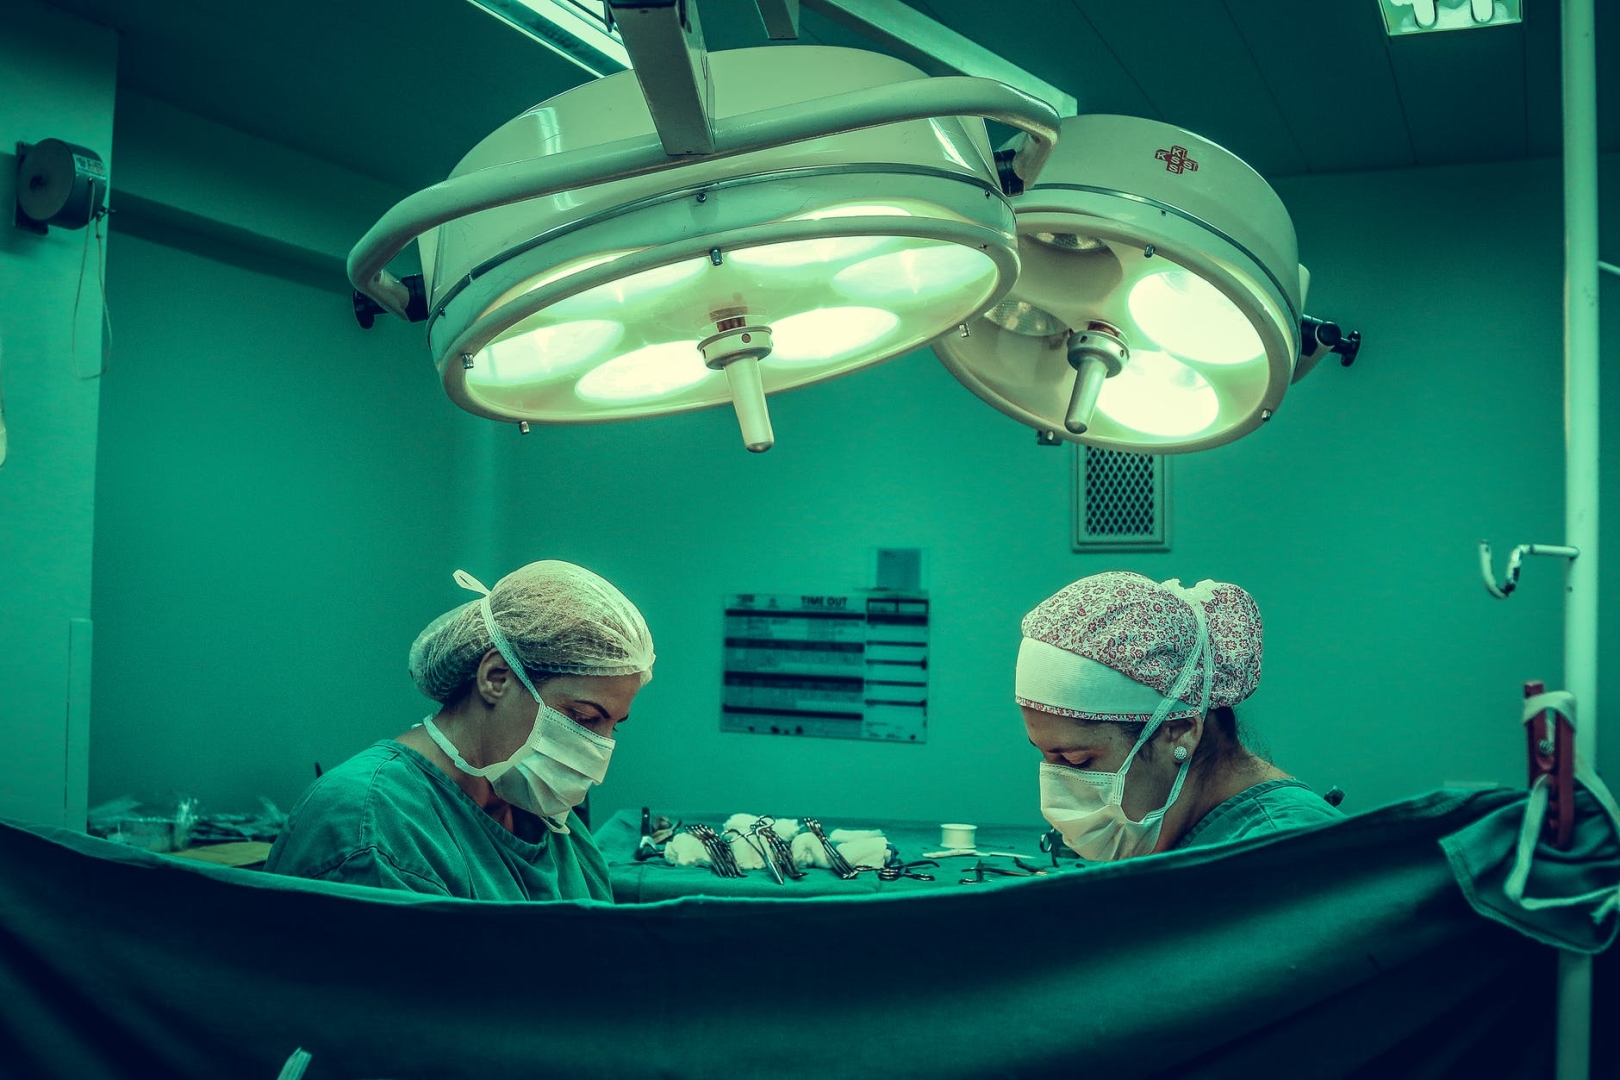 Ranking of the best surgical lights for 2020